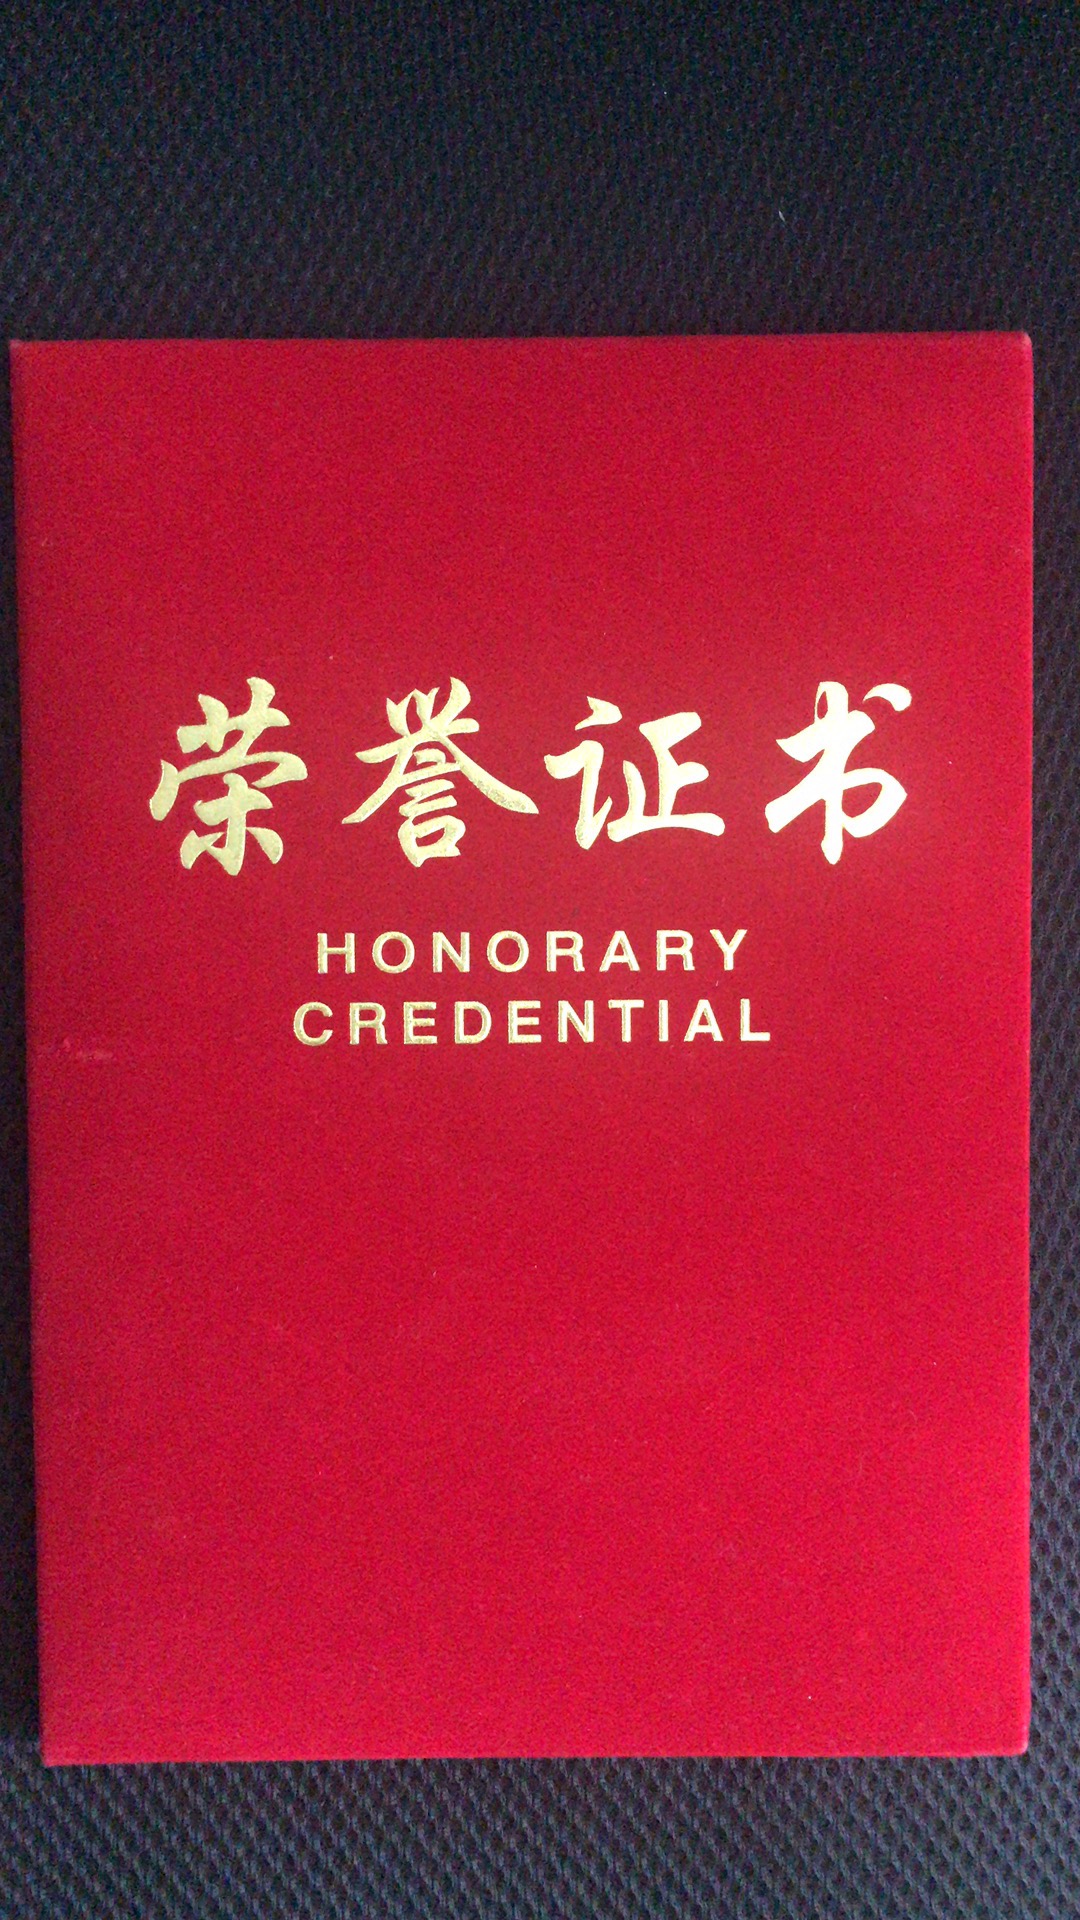 Honorary Credential